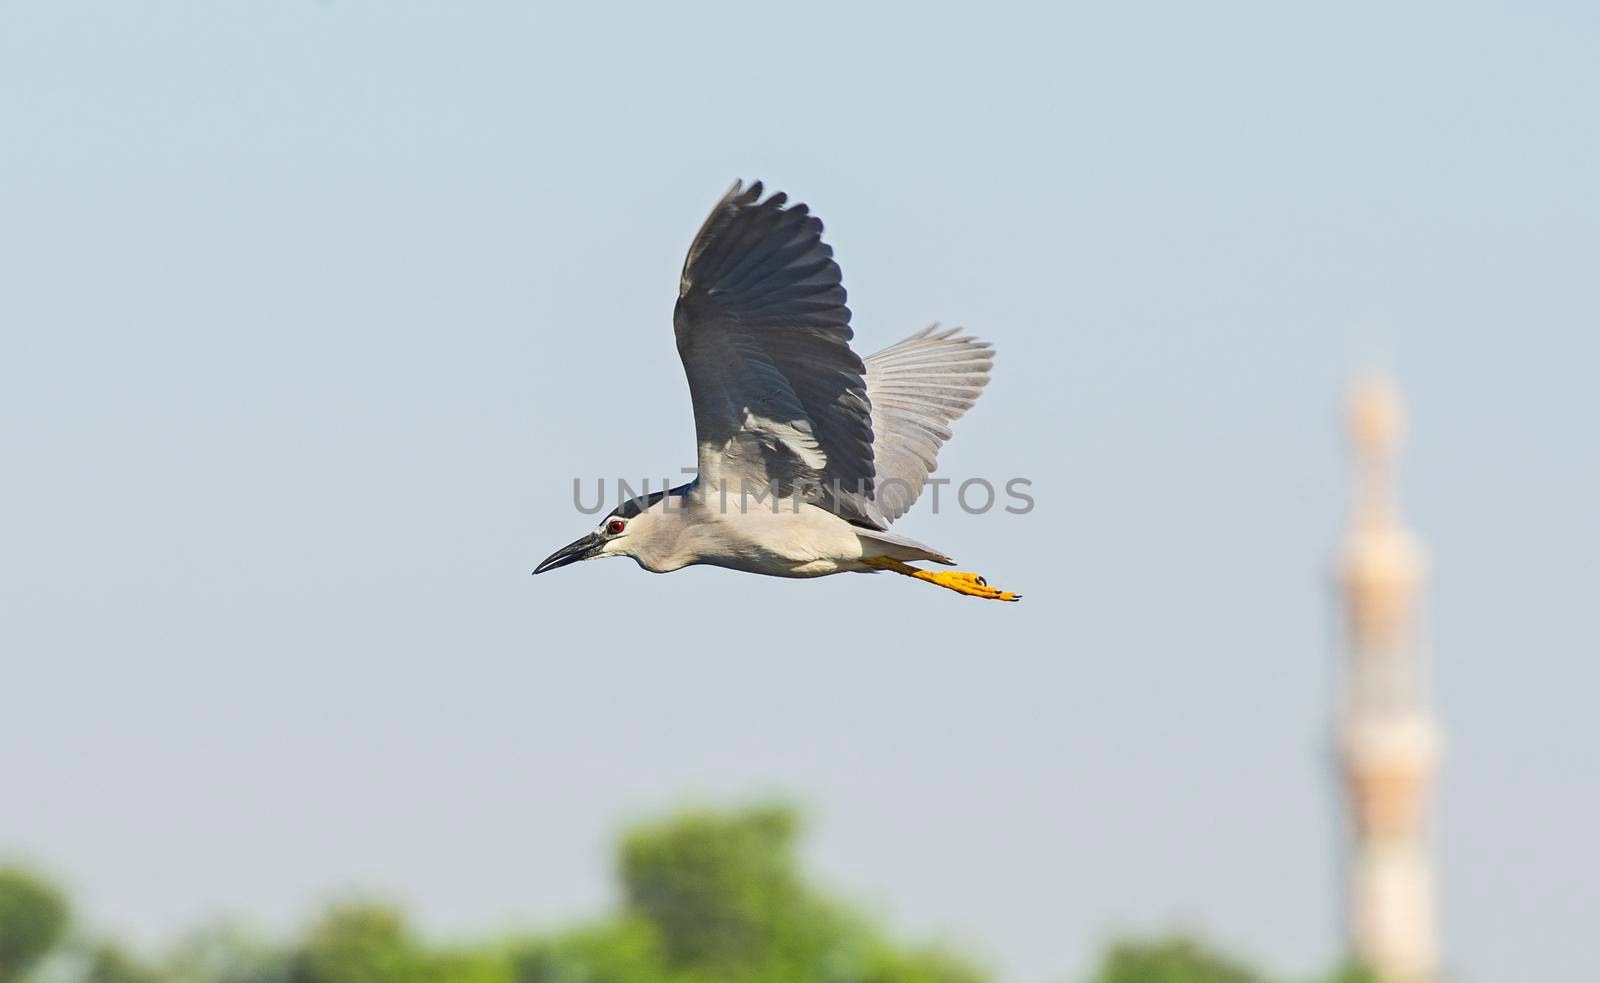 Black-crowned night heron nycticorax nycticorax in flight against blue sky background with minaret tower